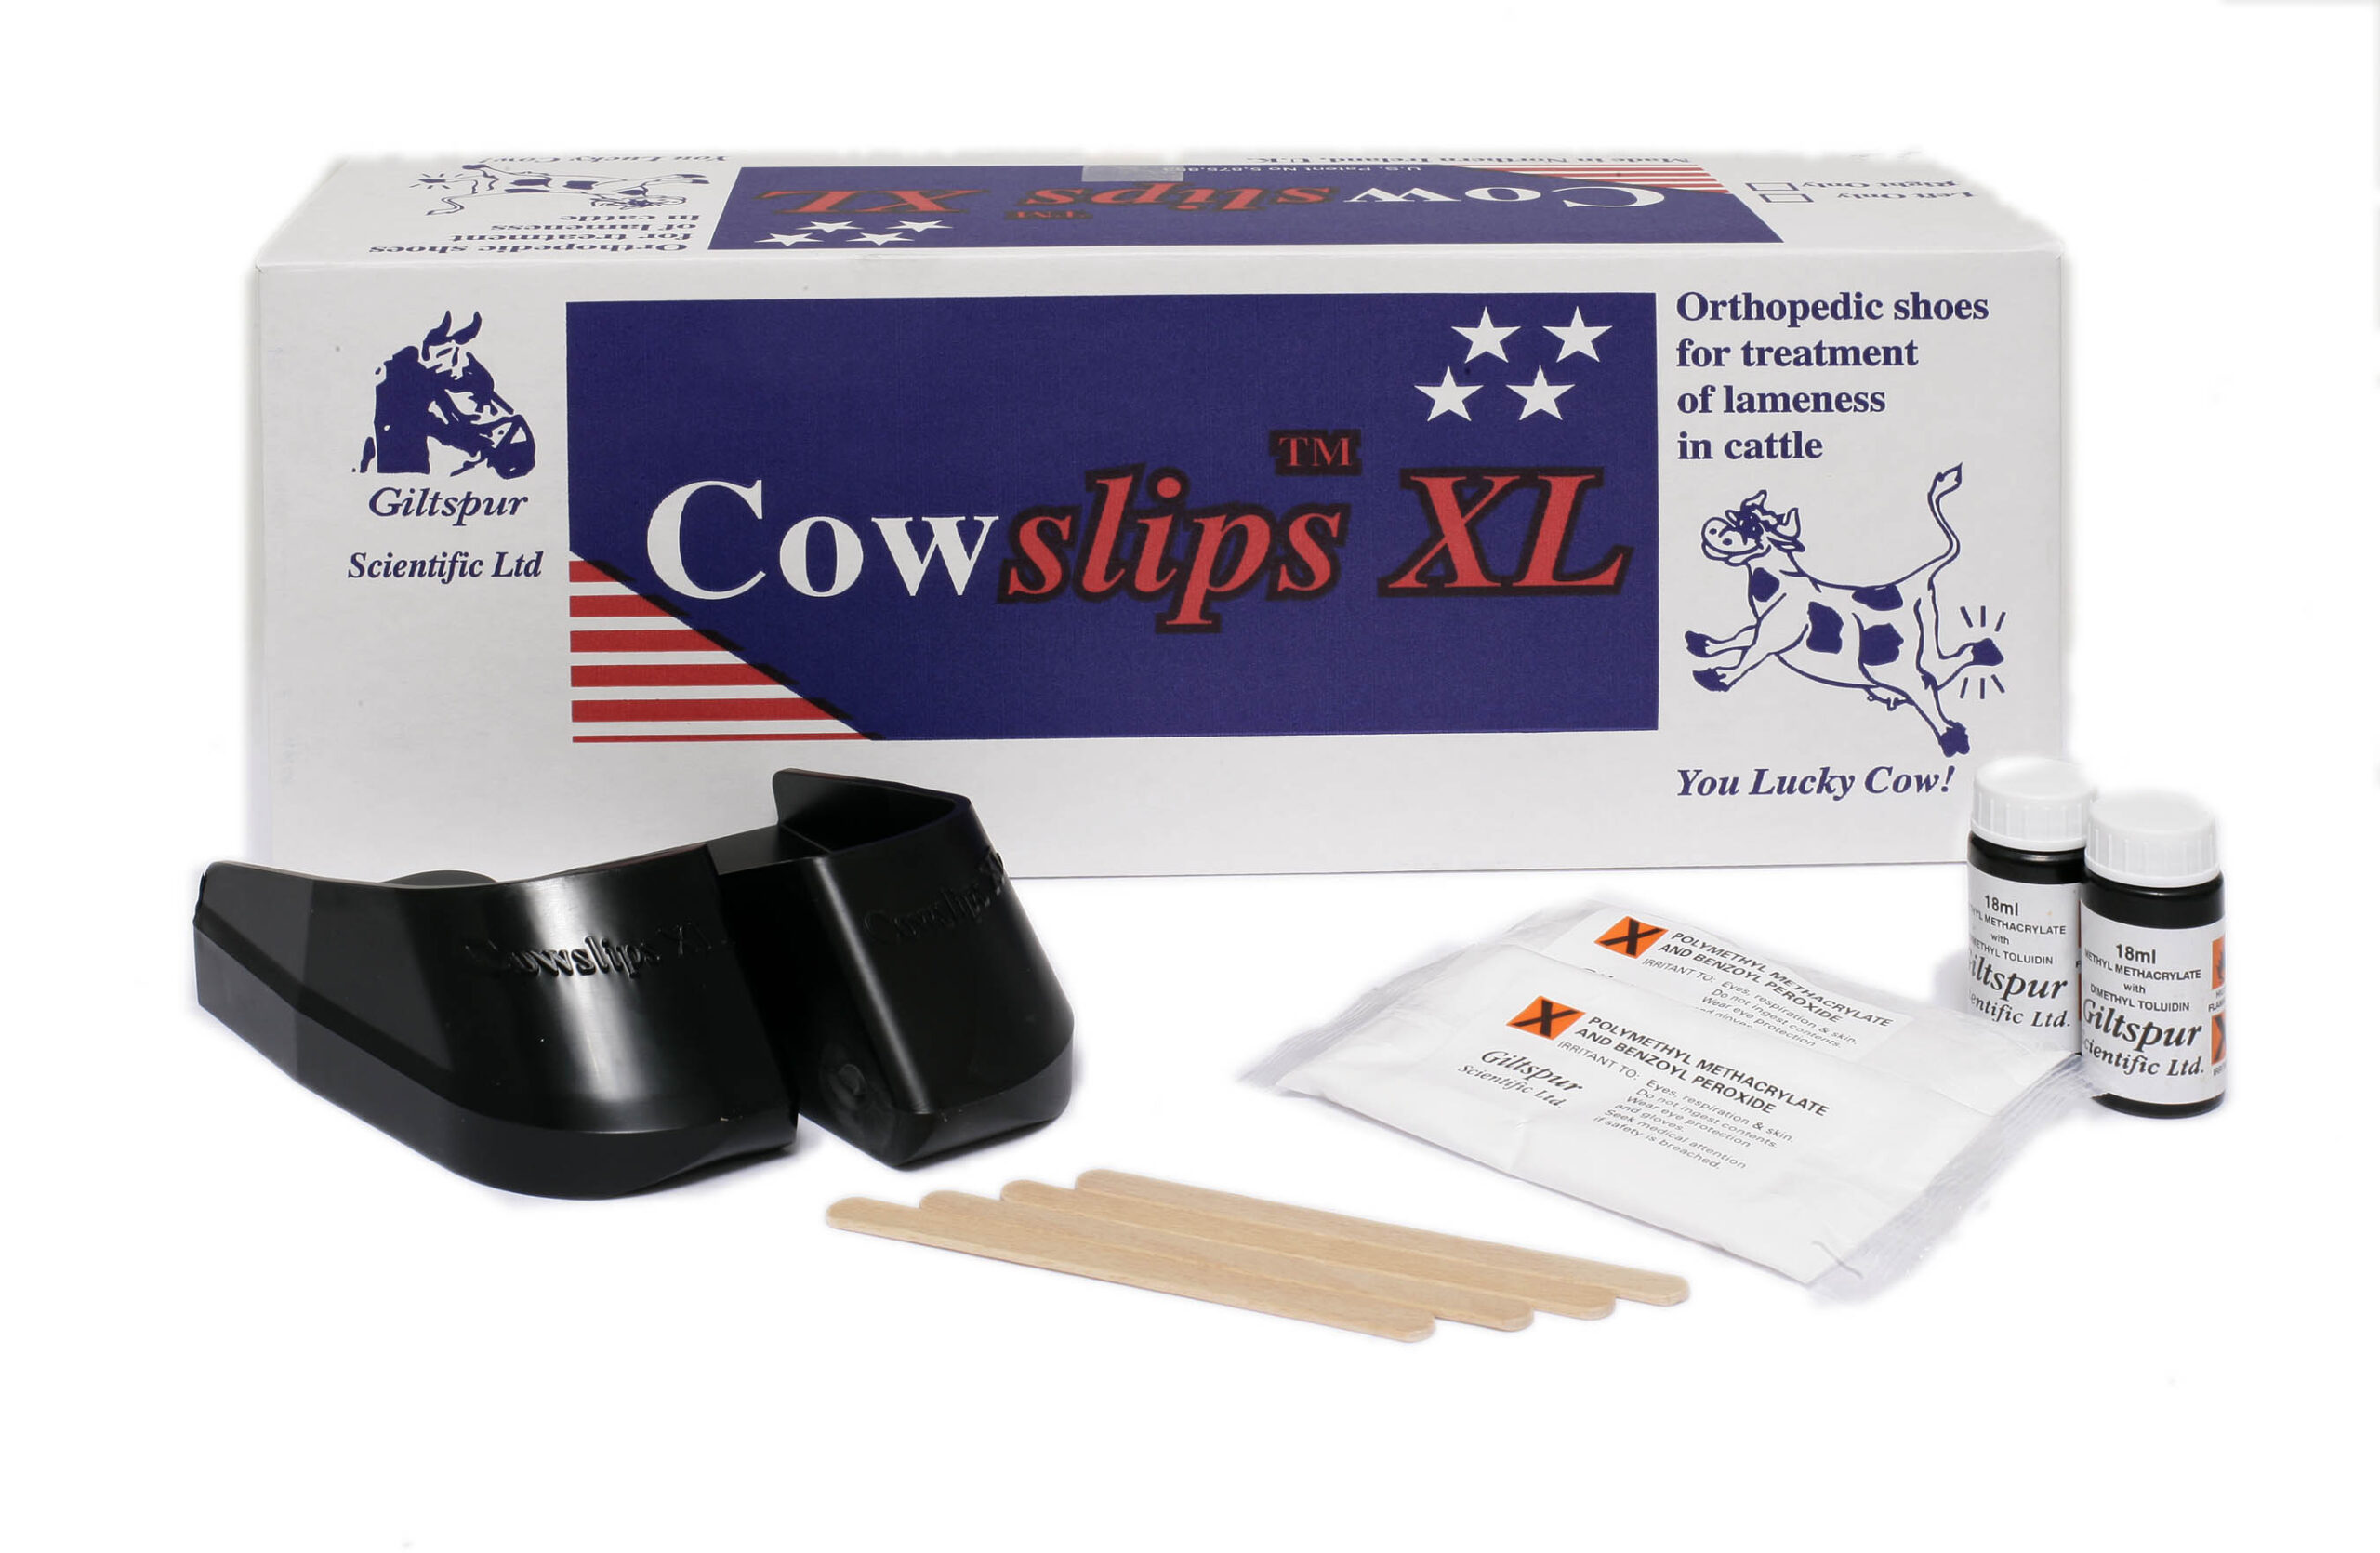 Cowslips Xl 4 Shoe Pack